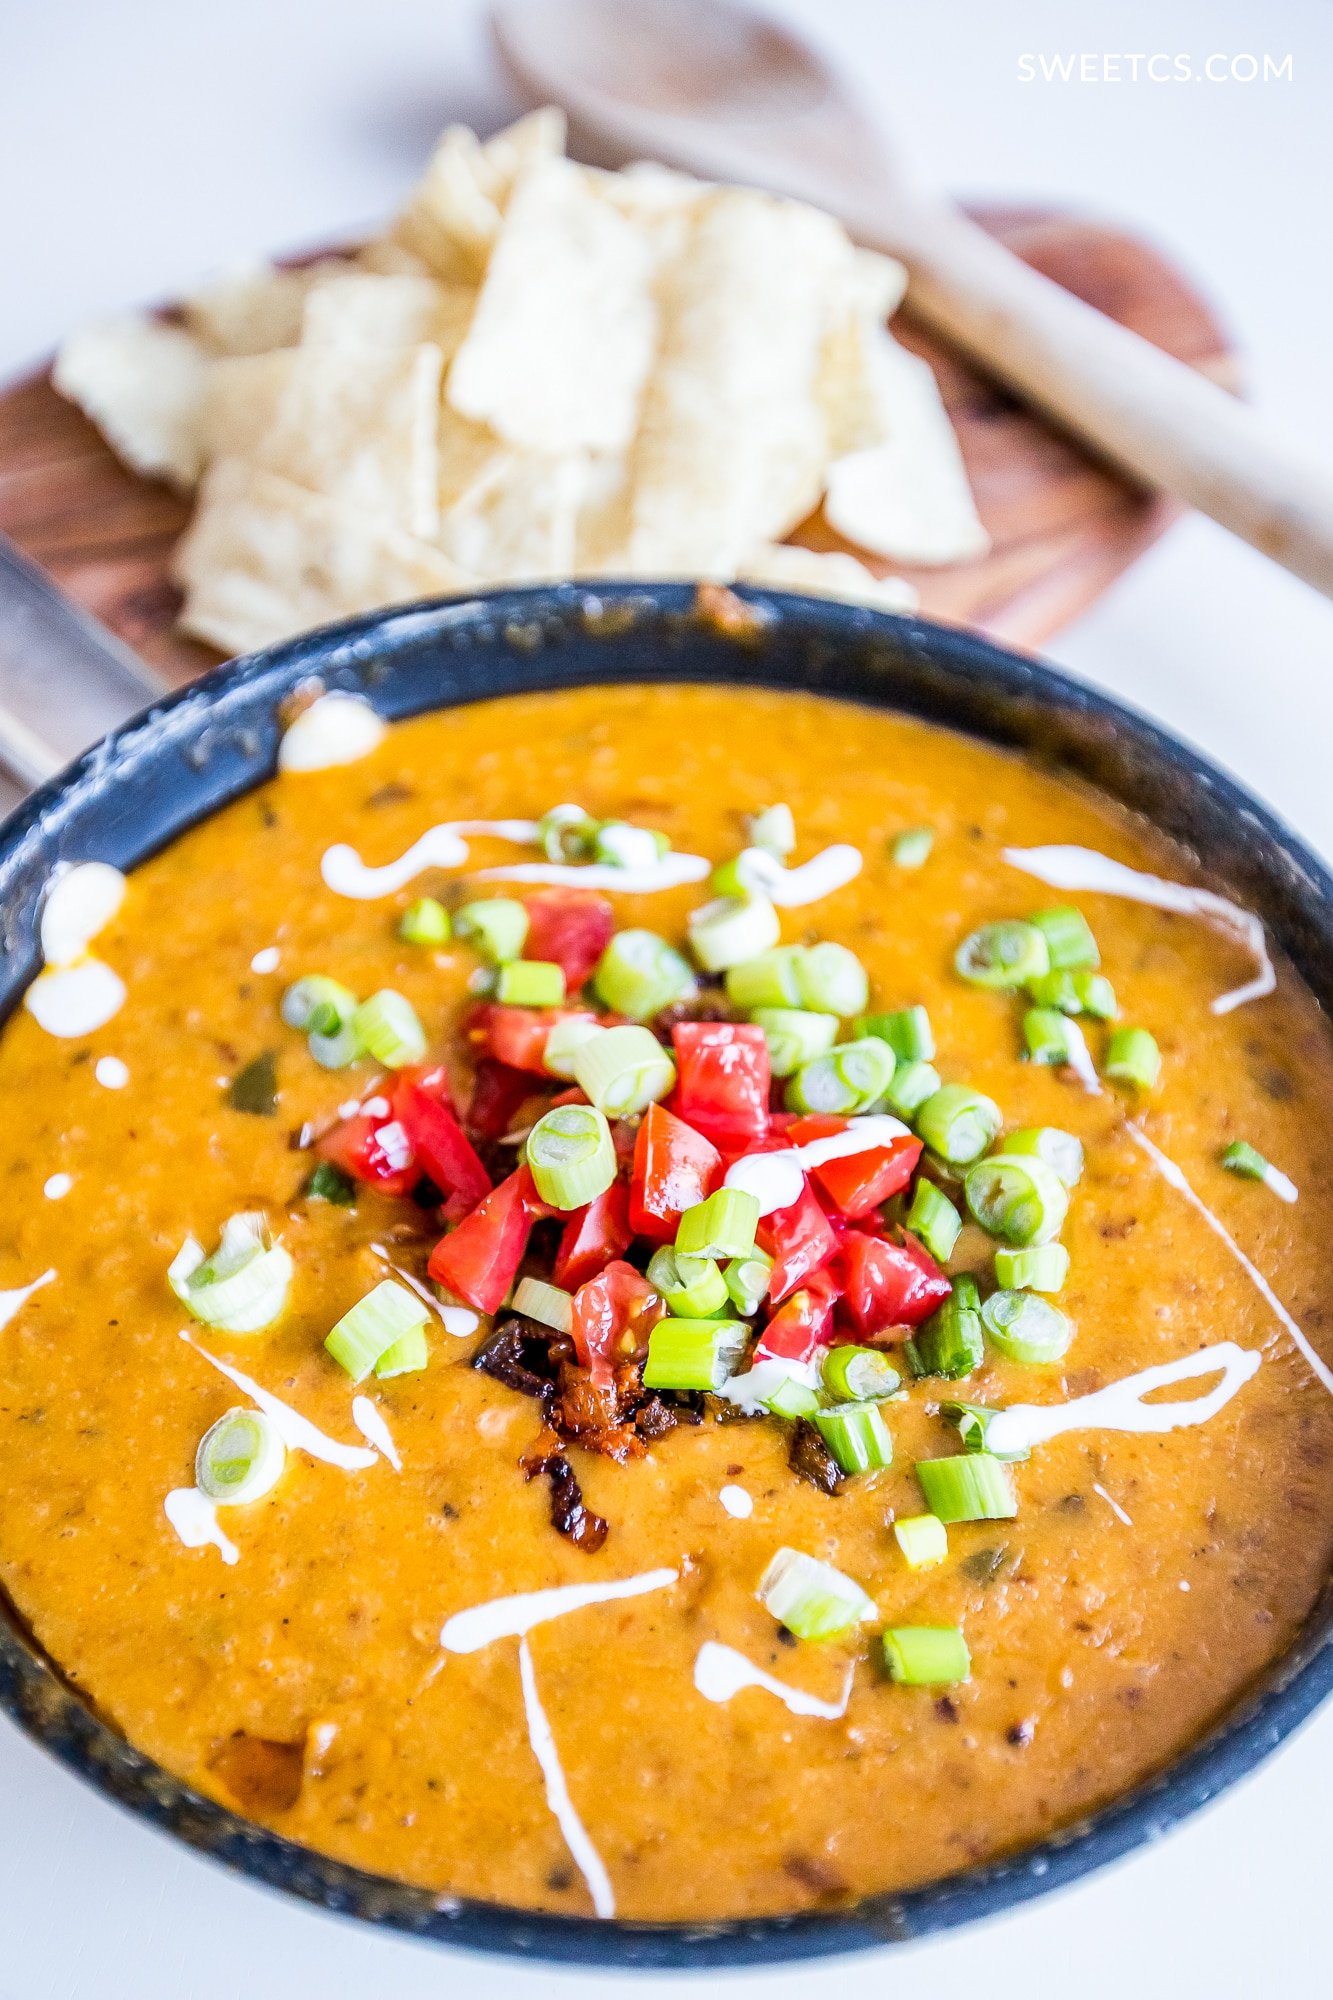 This queso is so easy and delicious- and full of spicy linguica sausage!